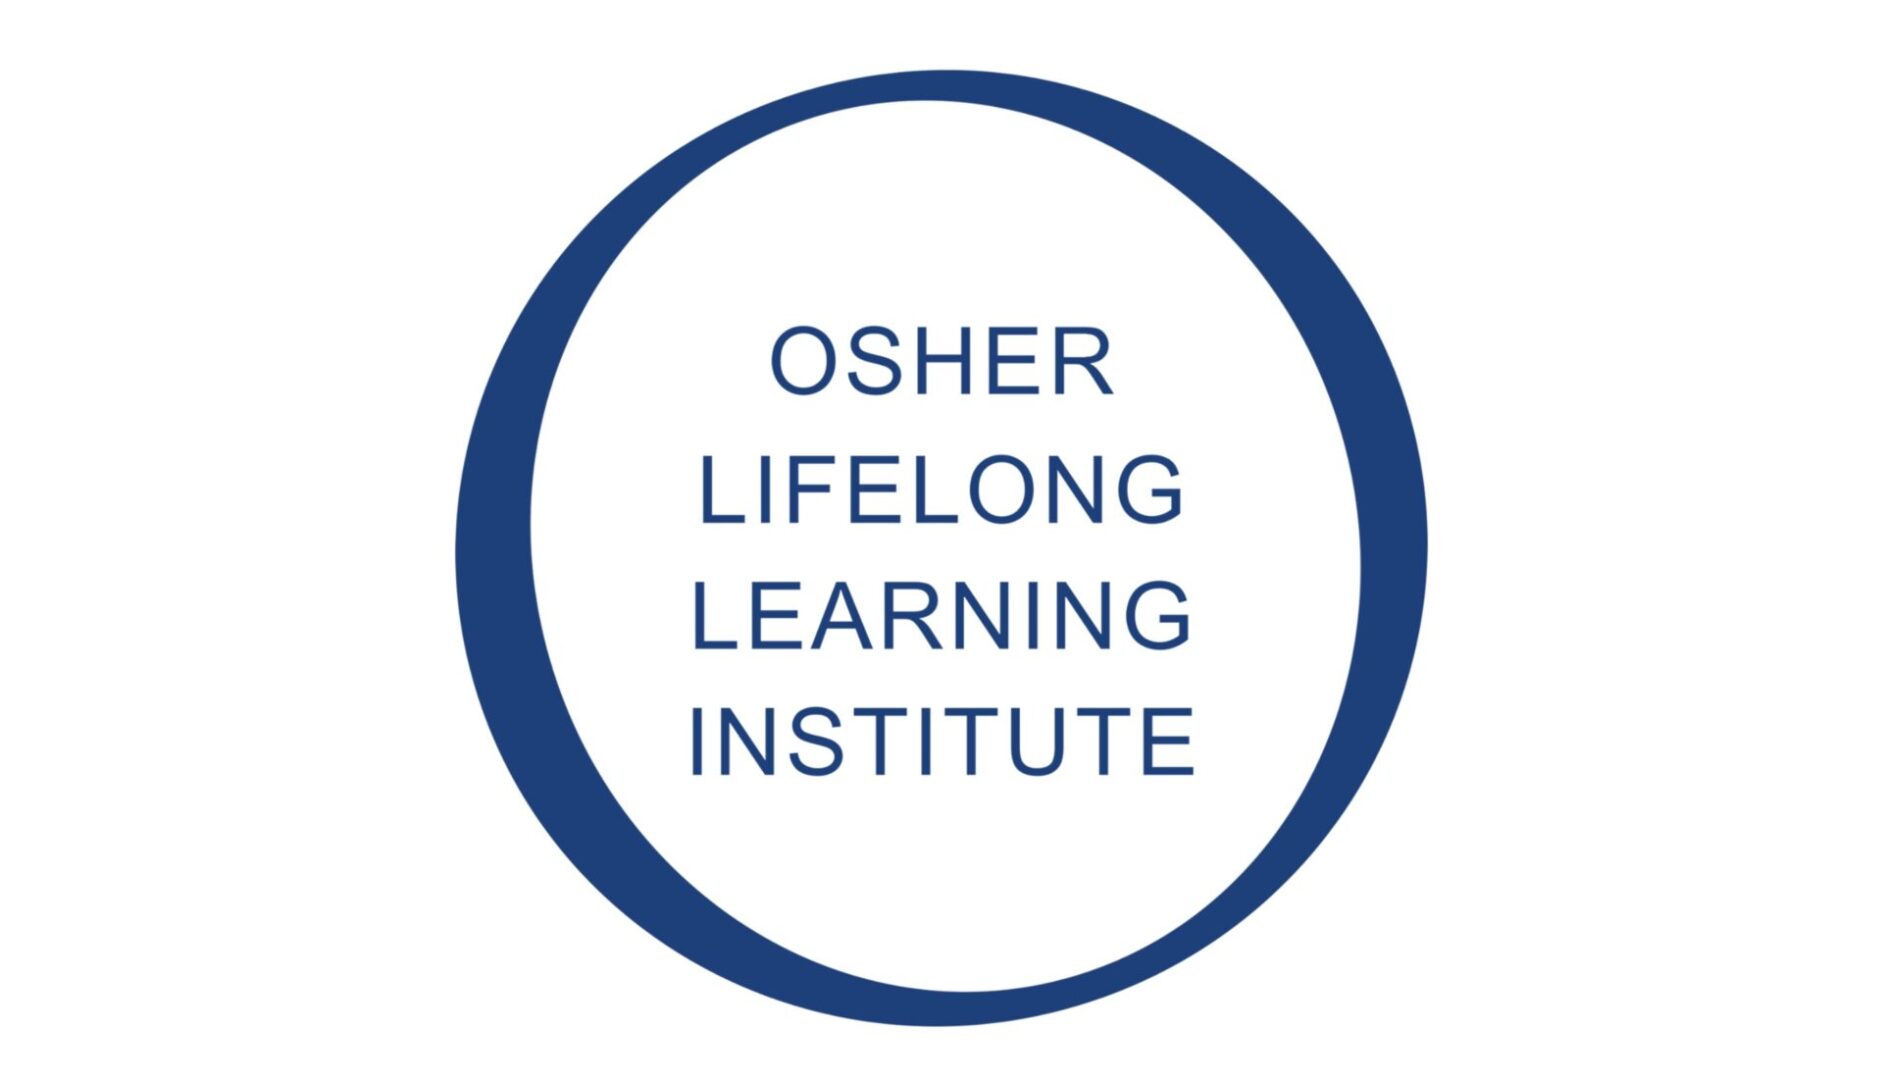 THE LOGO for the Osher Lifelong Learning Institute is shown. (Image provided)